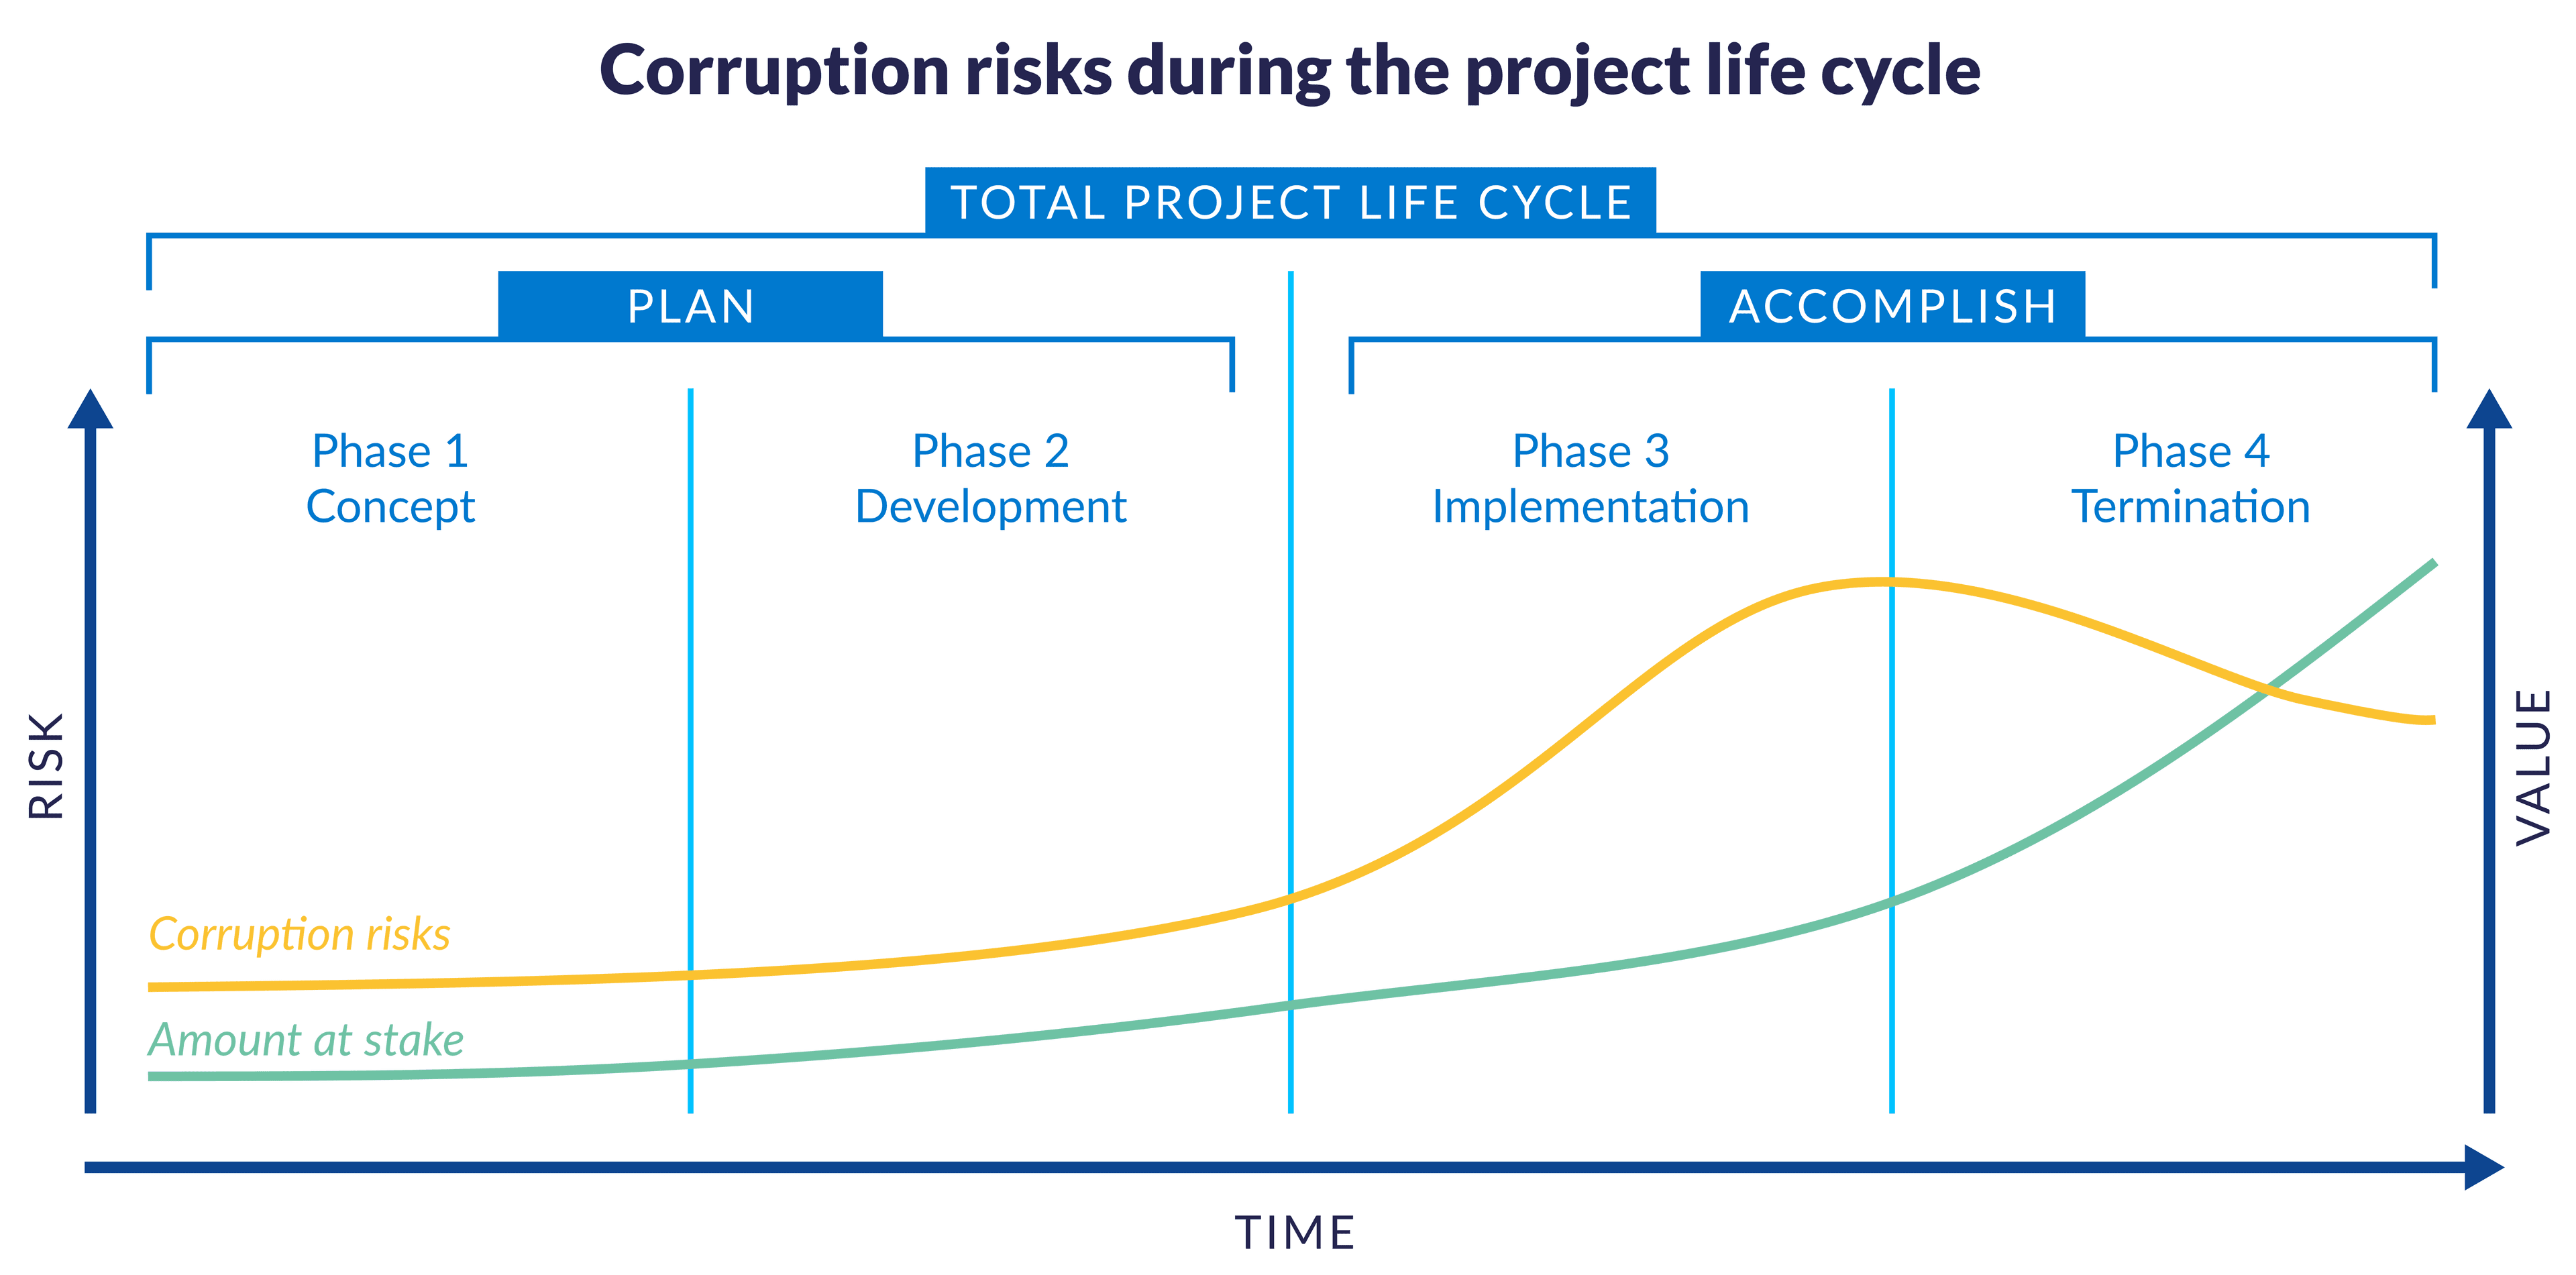 Illustration of how corruption risk evolves in project phases